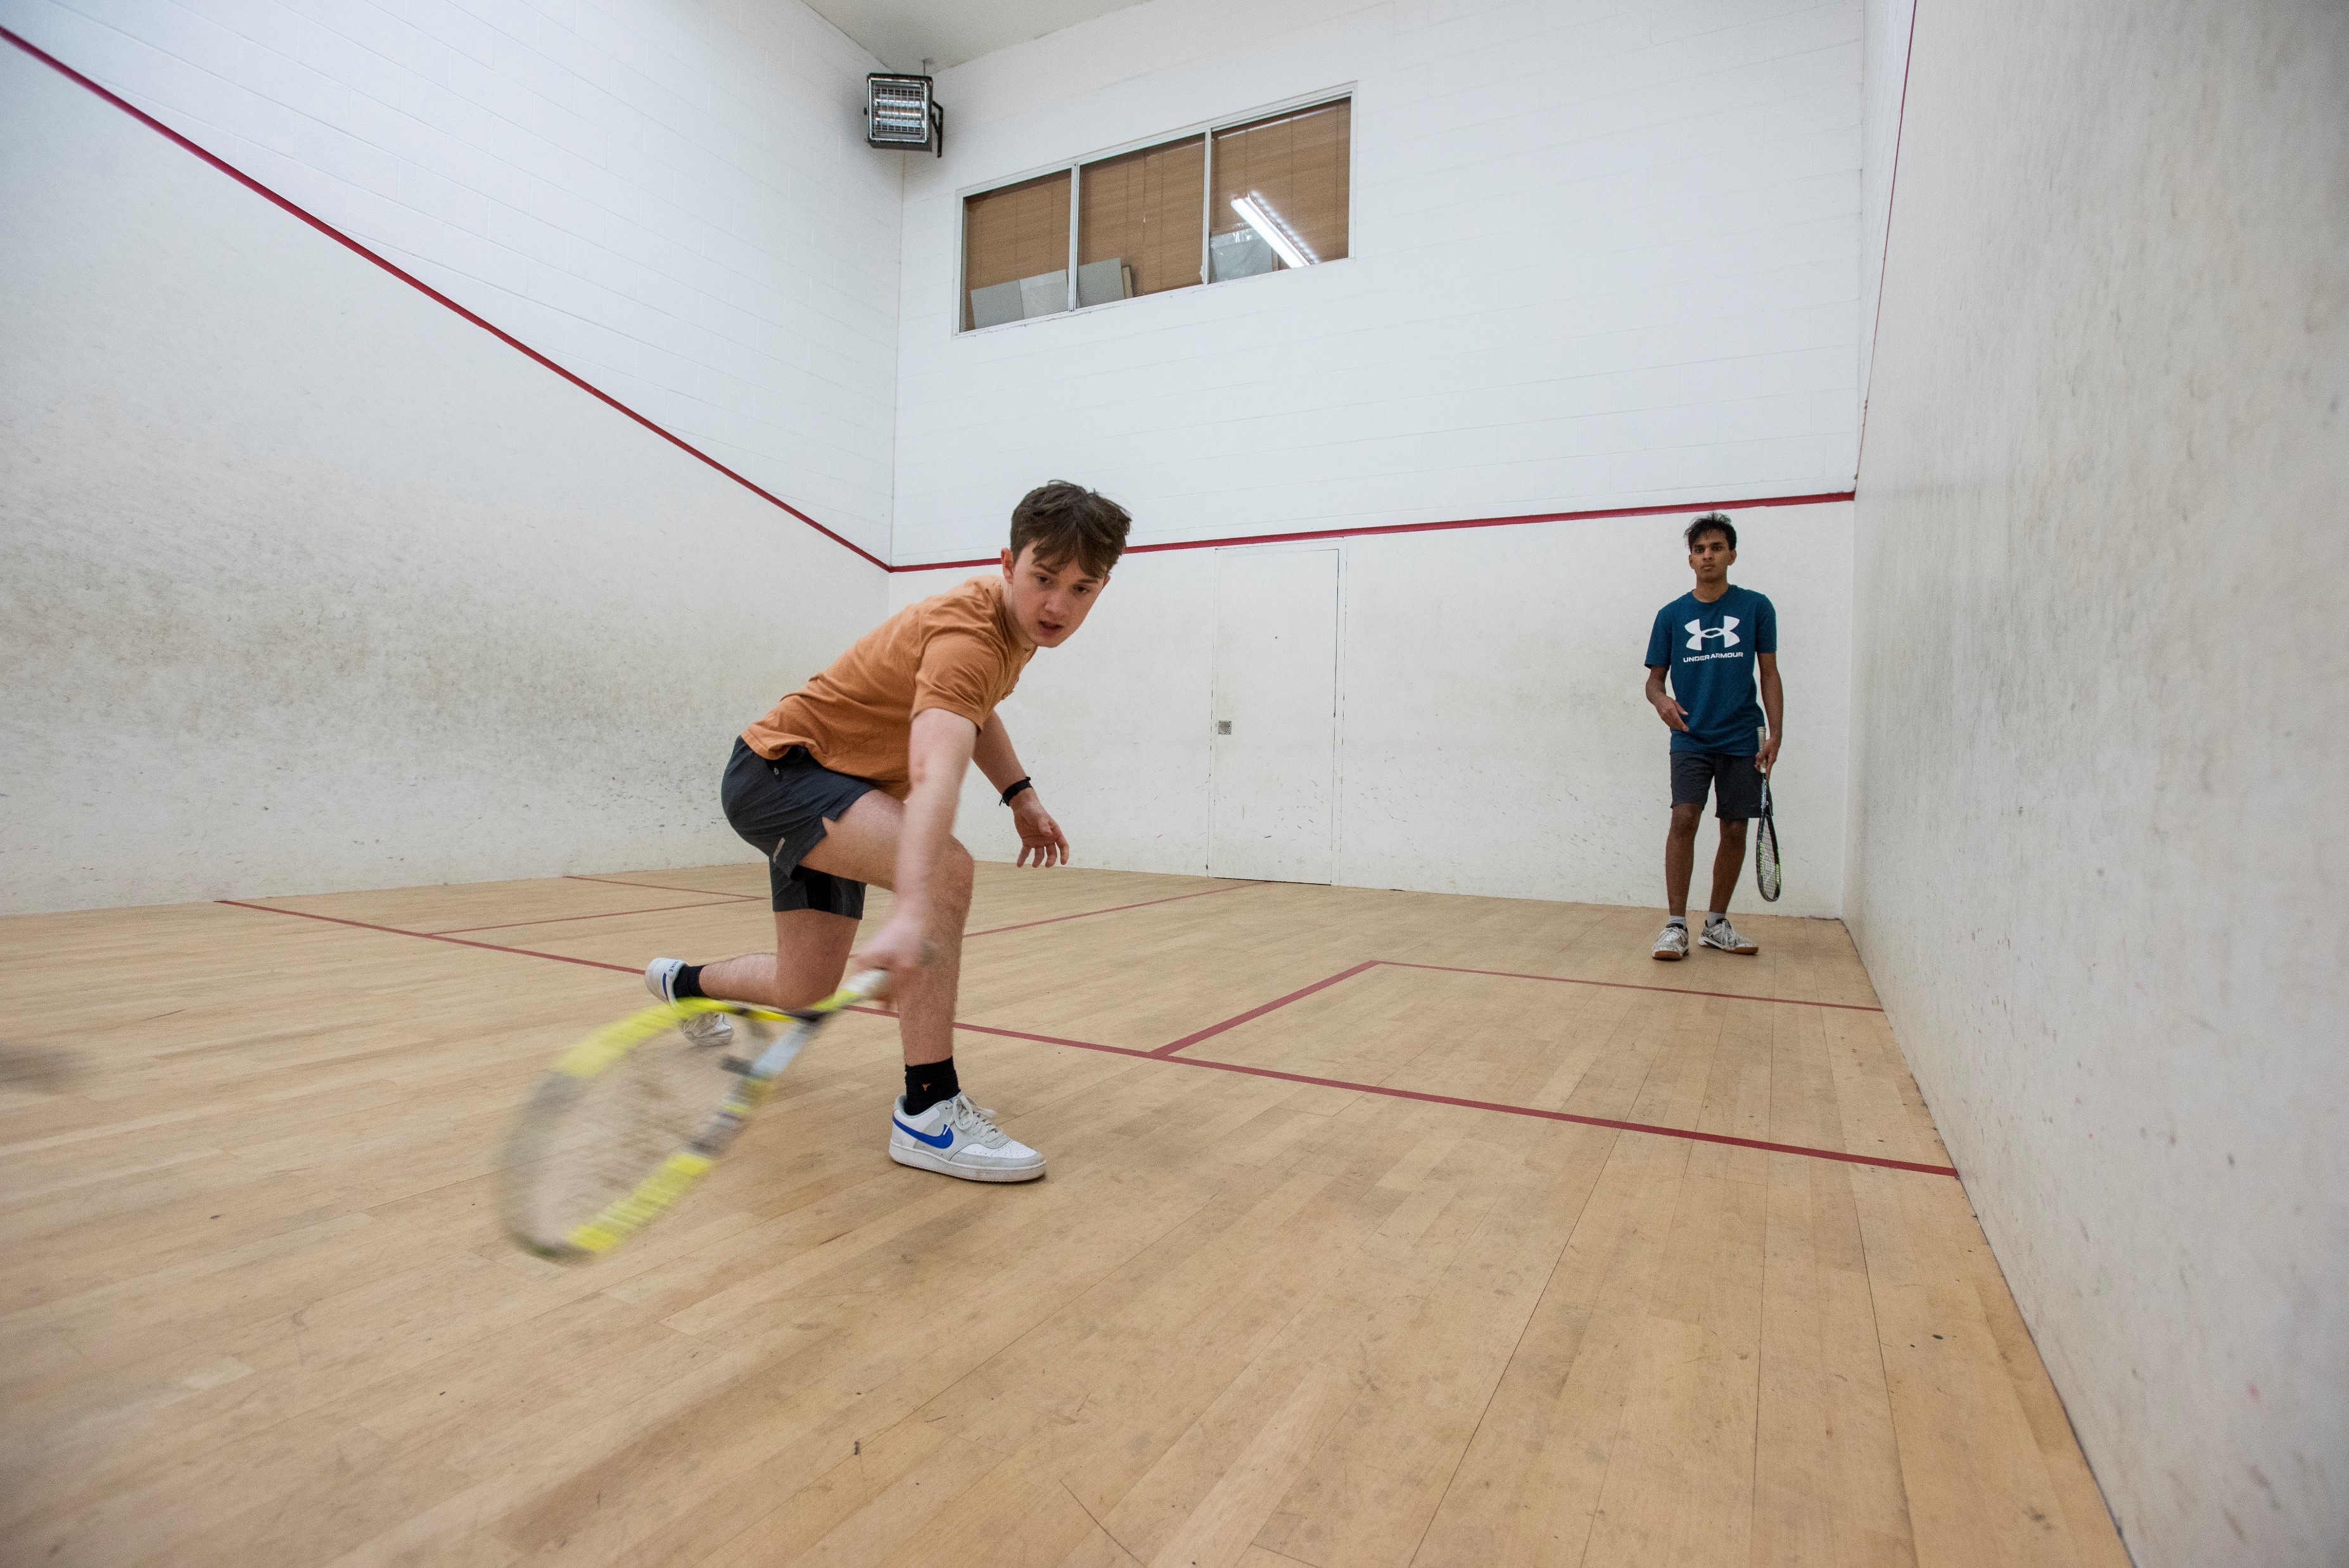 Two students play squash in the Weston Sports Ground